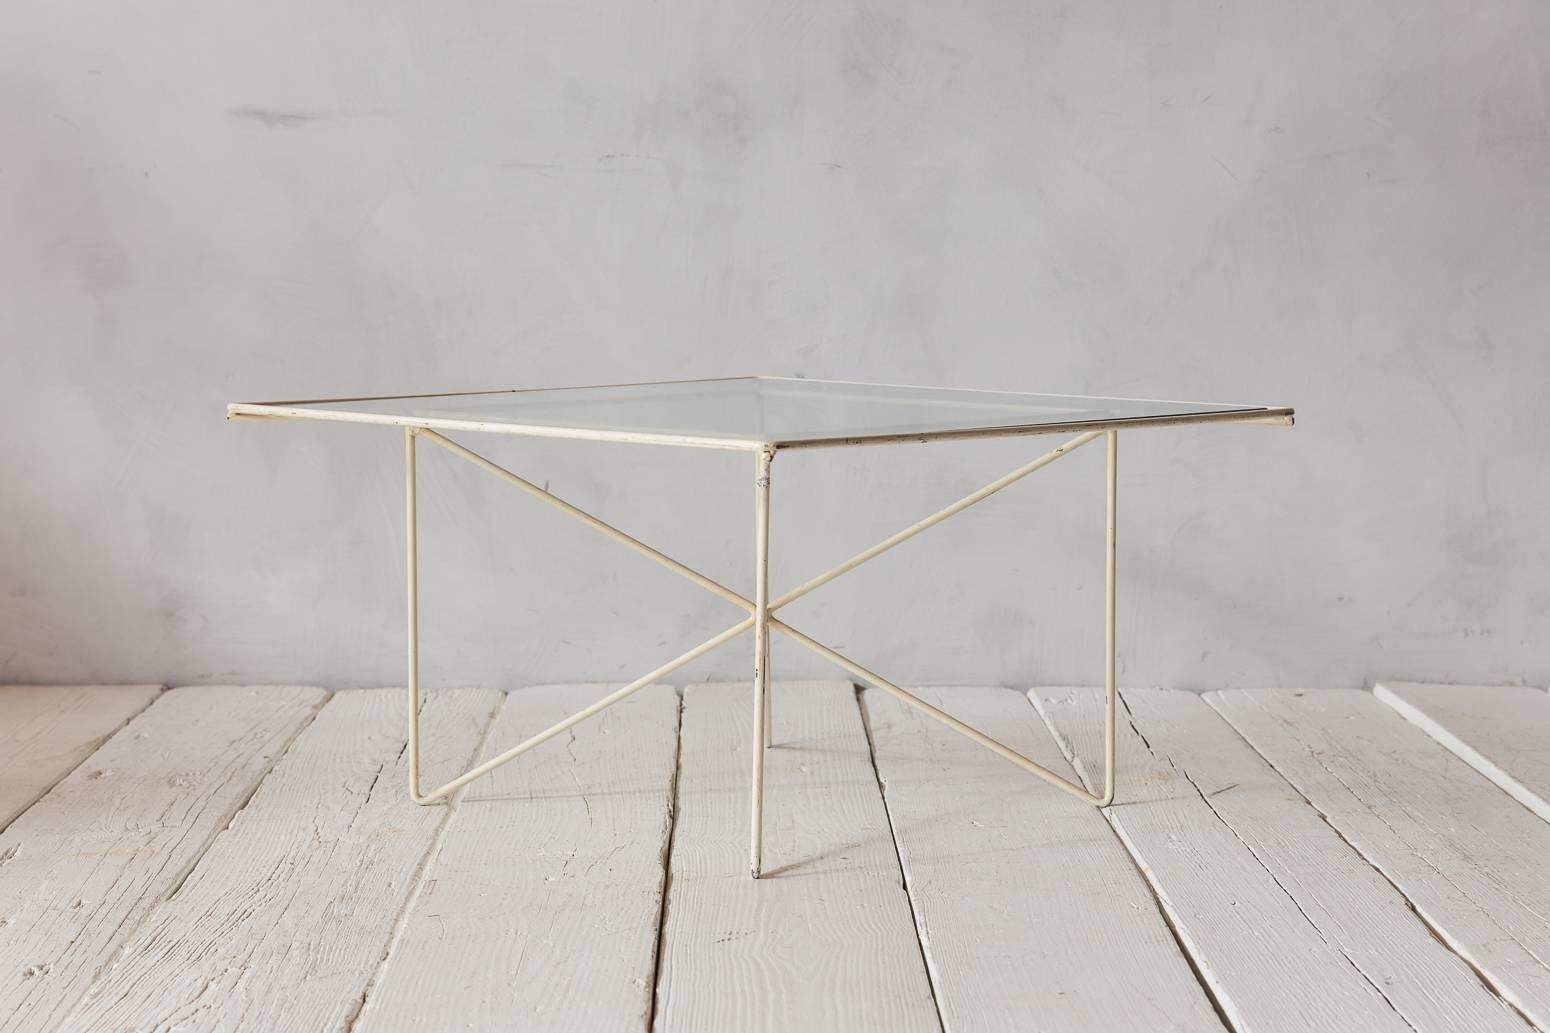 Vintage French geometric white metal and glass cocktail table.